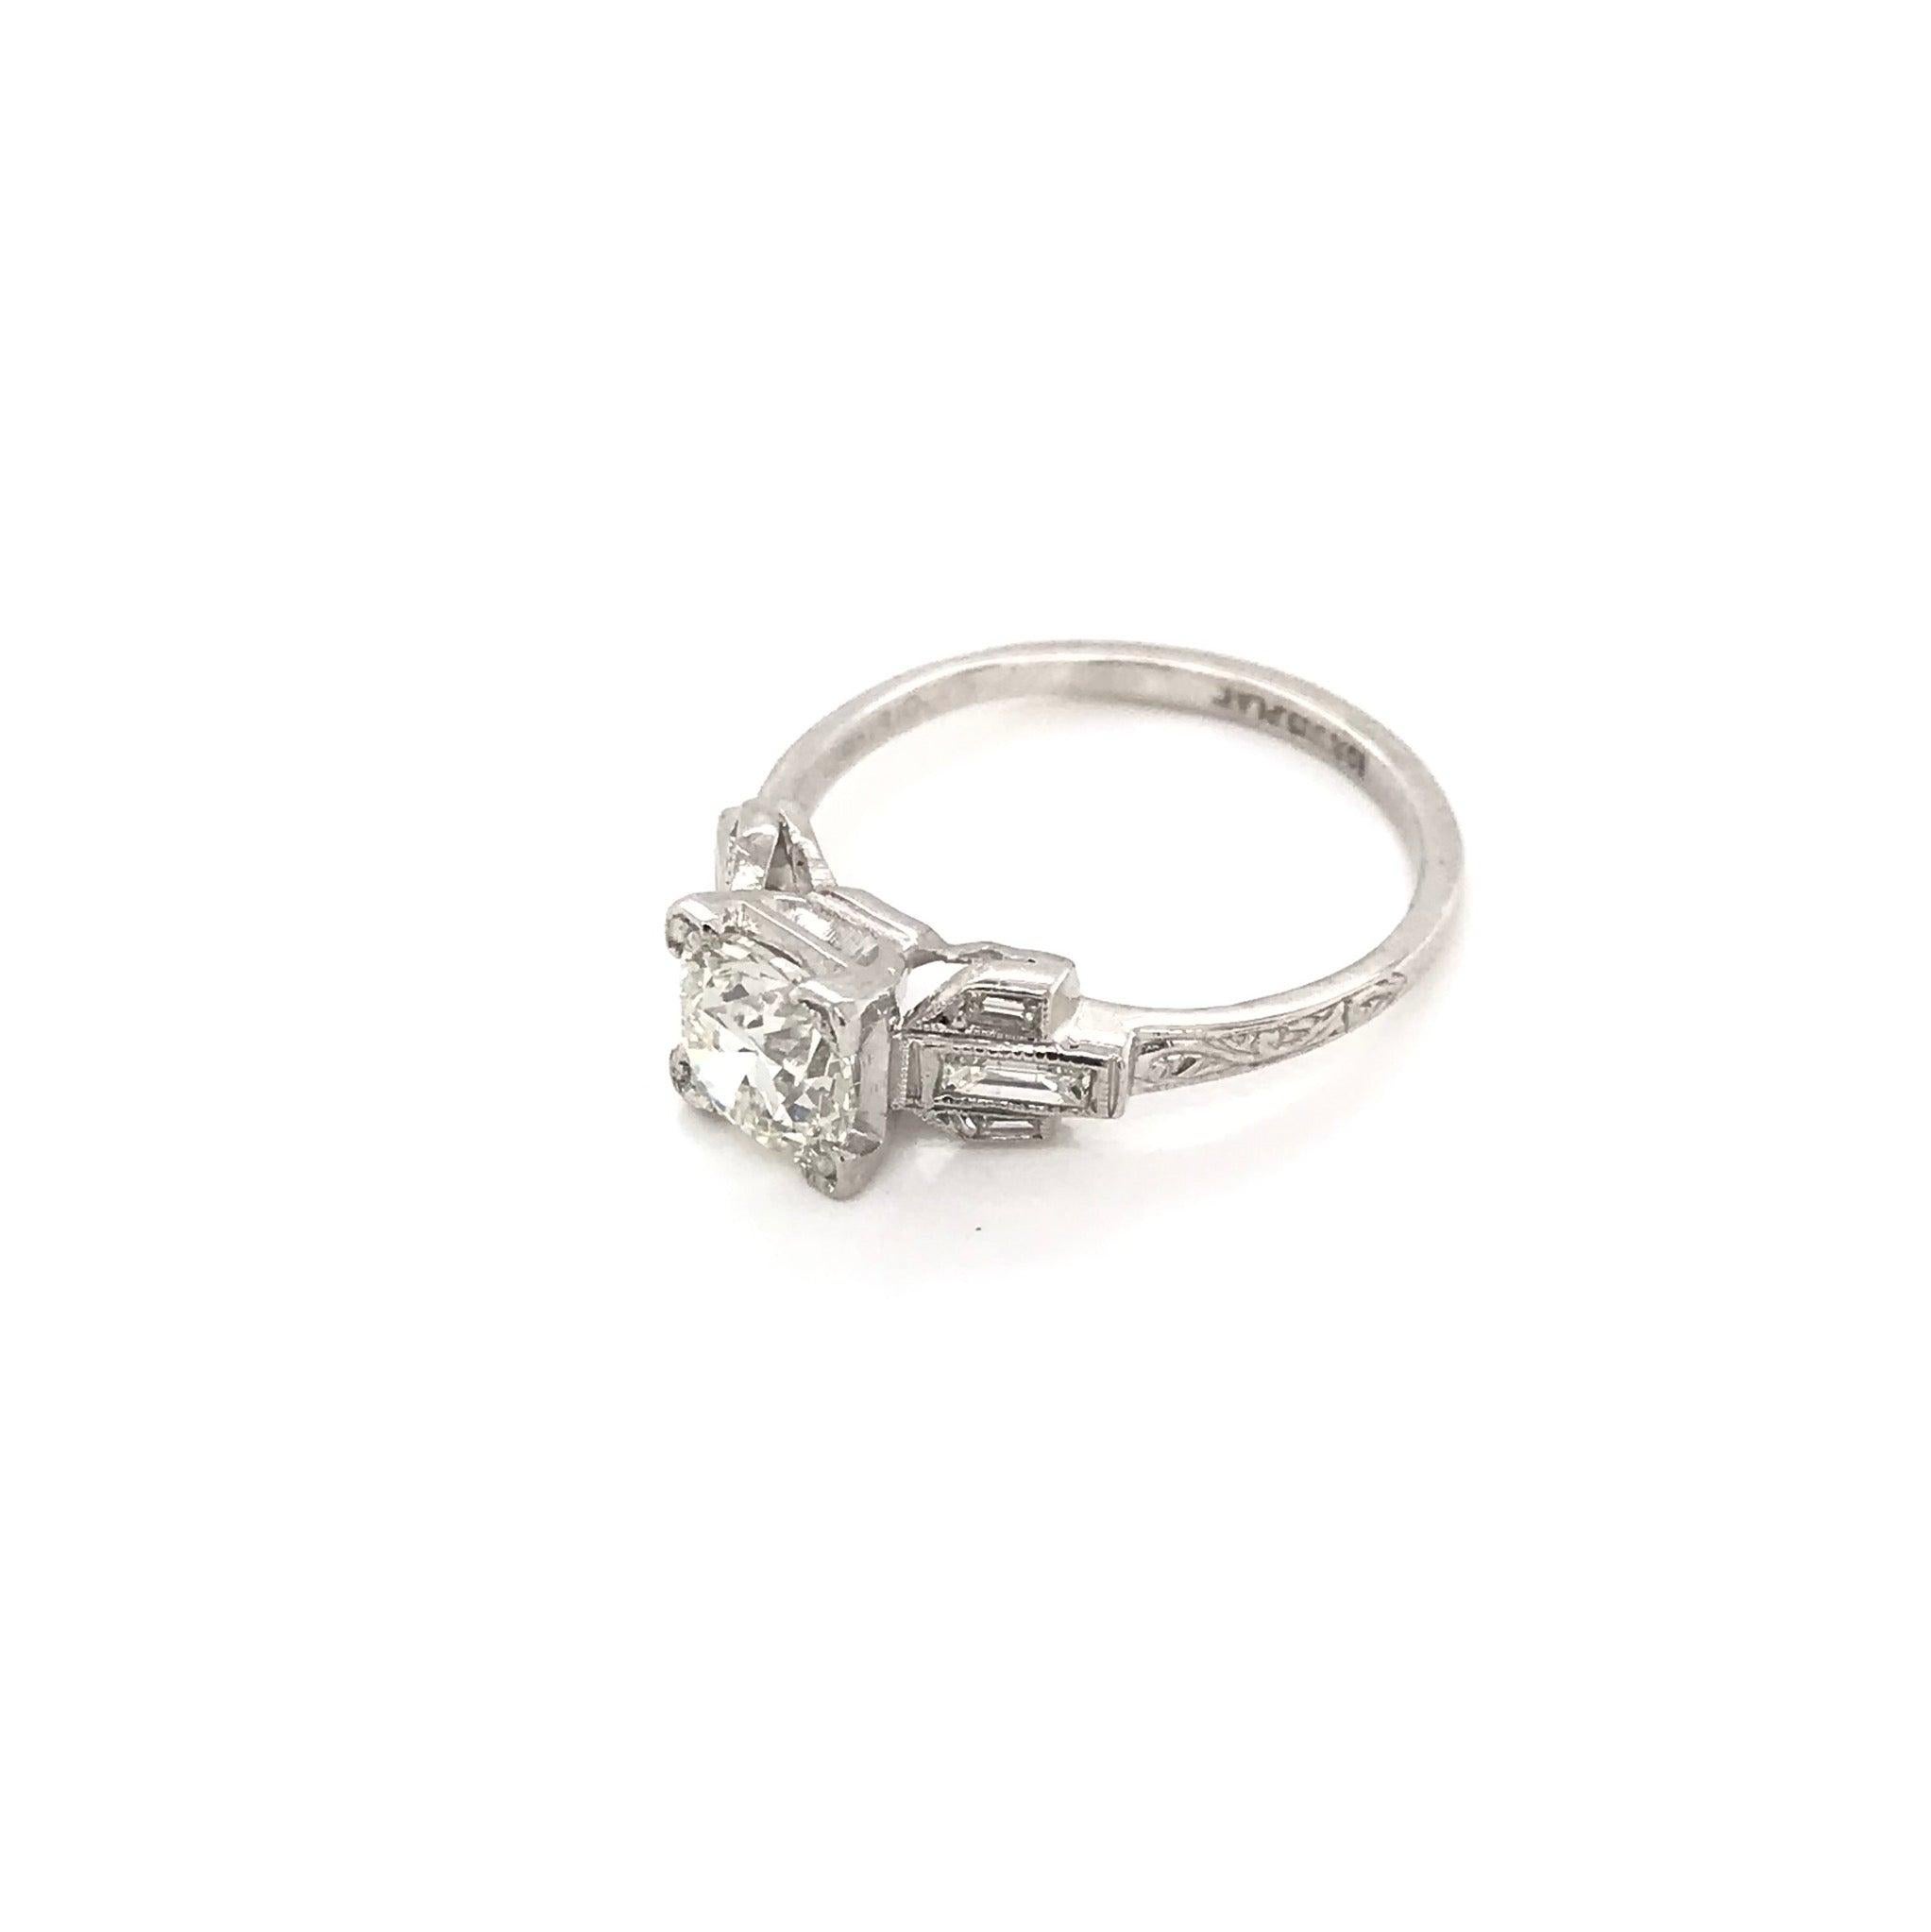 This gorgeous antique piece was handcrafted during the Art Deco design period ( 1920-1940 ). The ring features a fiery 1.0 carat center diamond. The center diamond grades approximately J in color, VS2 in clarity. This charming piece also features